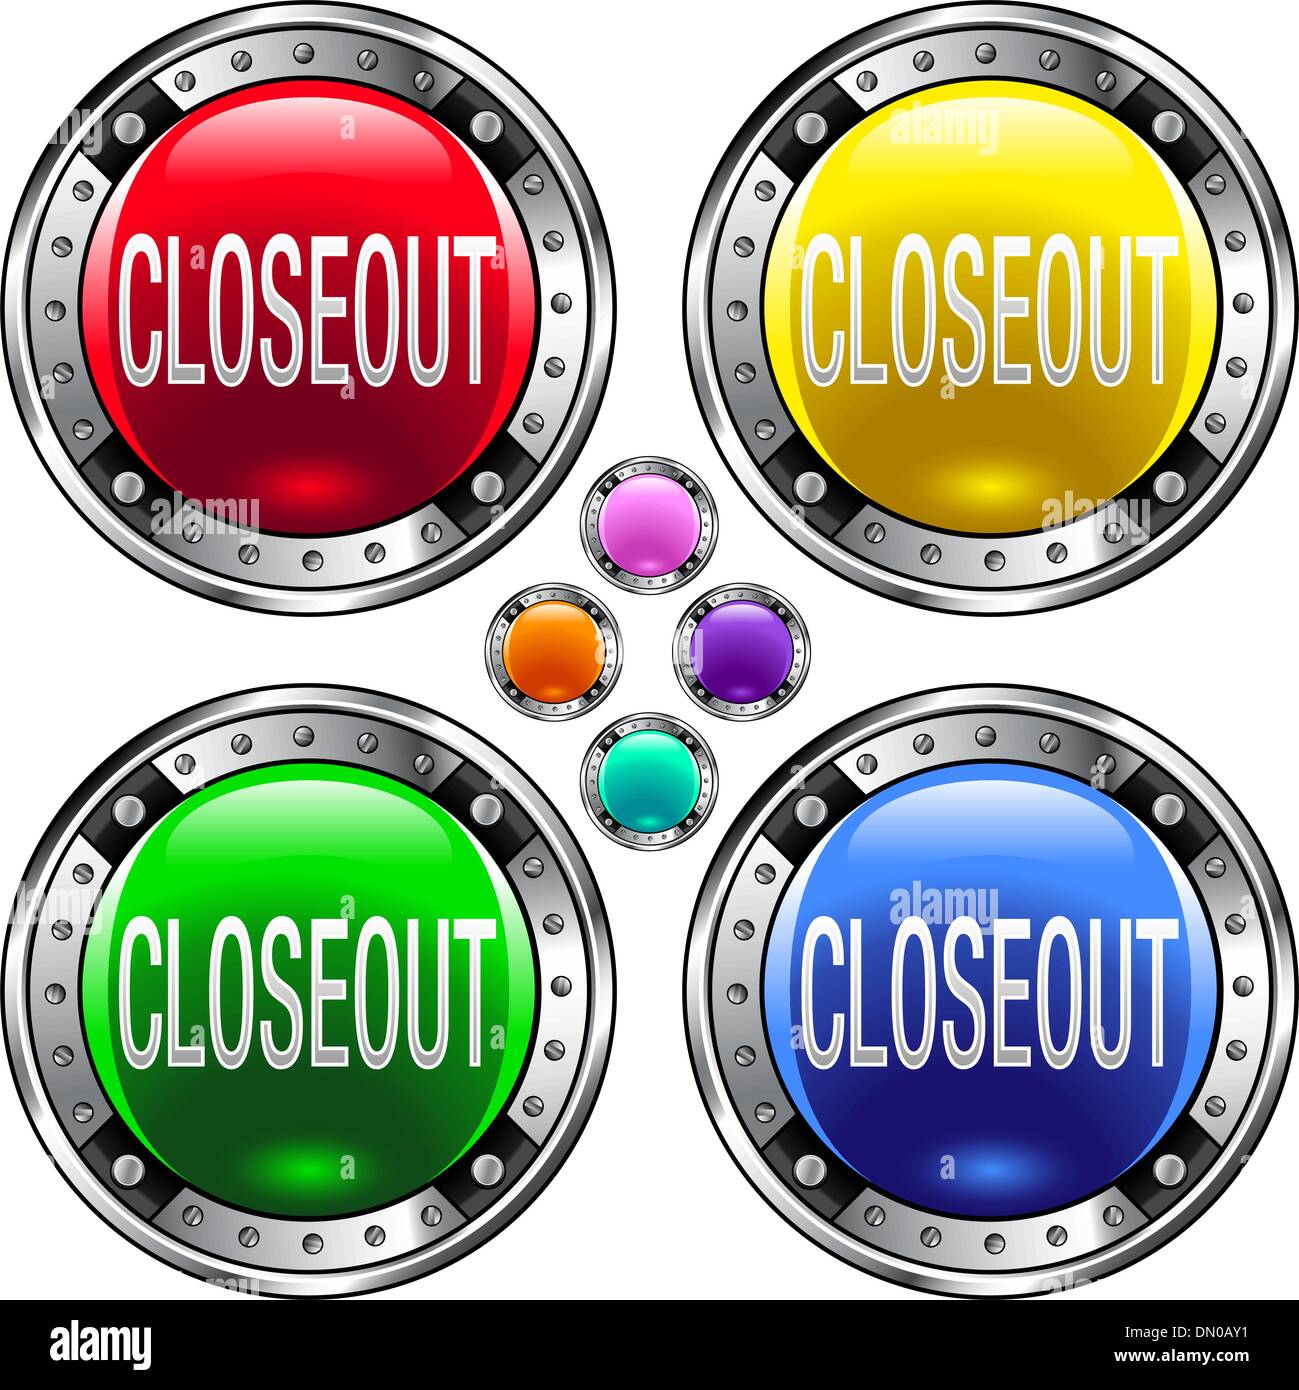 Closeout colorful button Stock Vector